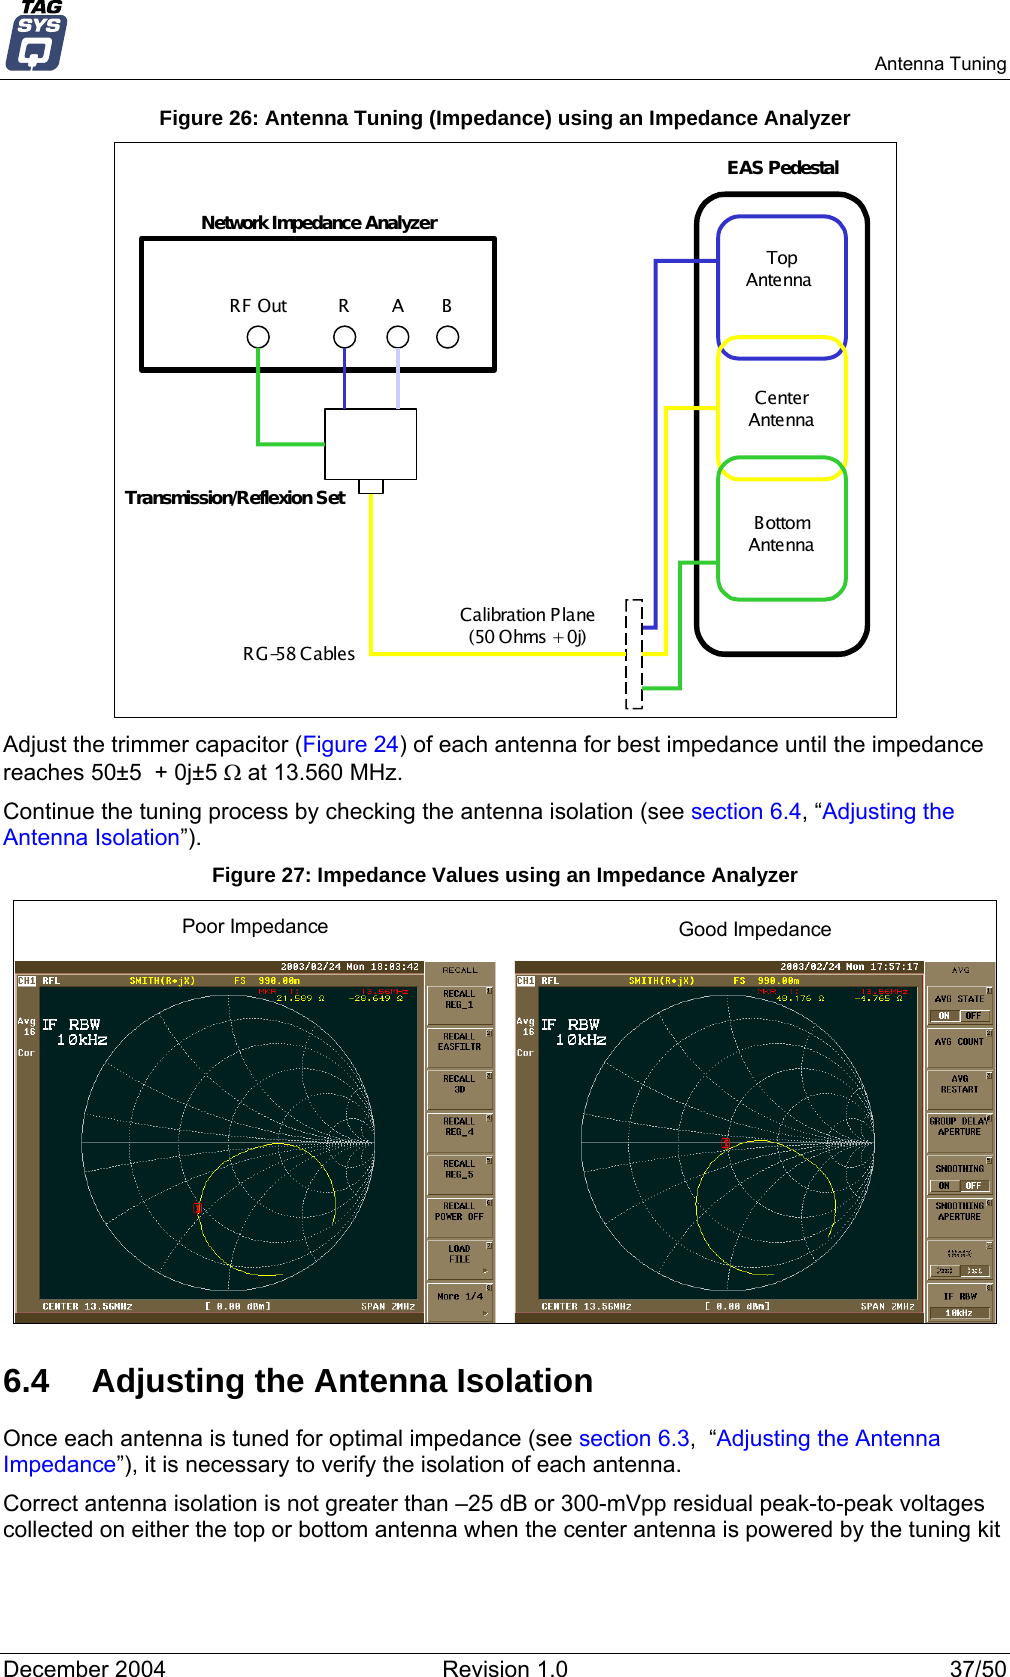   Antenna Tuning Figure 26: Antenna Tuning (Impedance) using an Impedance Analyzer EAS PedestalNetwork Impedance AnalyzerTopAntenna CenterAntennaB ottomAntennaCalibration Plane(50 Ohms + 0j)BARRF OutTransmission/Reflexion SetRG-58 Cables Adjust the trimmer capacitor (Figure 24) of each antenna for best impedance until the impedance reaches 50±5  + 0j±5 Ω at 13.560 MHz.  Continue the tuning process by checking the antenna isolation (see section 6.4, “Adjusting the Antenna Isolation”). Figure 27: Impedance Values using an Impedance Analyzer Poor Impedance Good Impedance 6.4  Adjusting the Antenna Isolation Once each antenna is tuned for optimal impedance (see section 6.3,  “Adjusting the Antenna Impedance”), it is necessary to verify the isolation of each antenna.  Correct antenna isolation is not greater than –25 dB or 300-mVpp residual peak-to-peak voltages collected on either the top or bottom antenna when the center antenna is powered by the tuning kit December 2004  Revision 1.0  37/50 